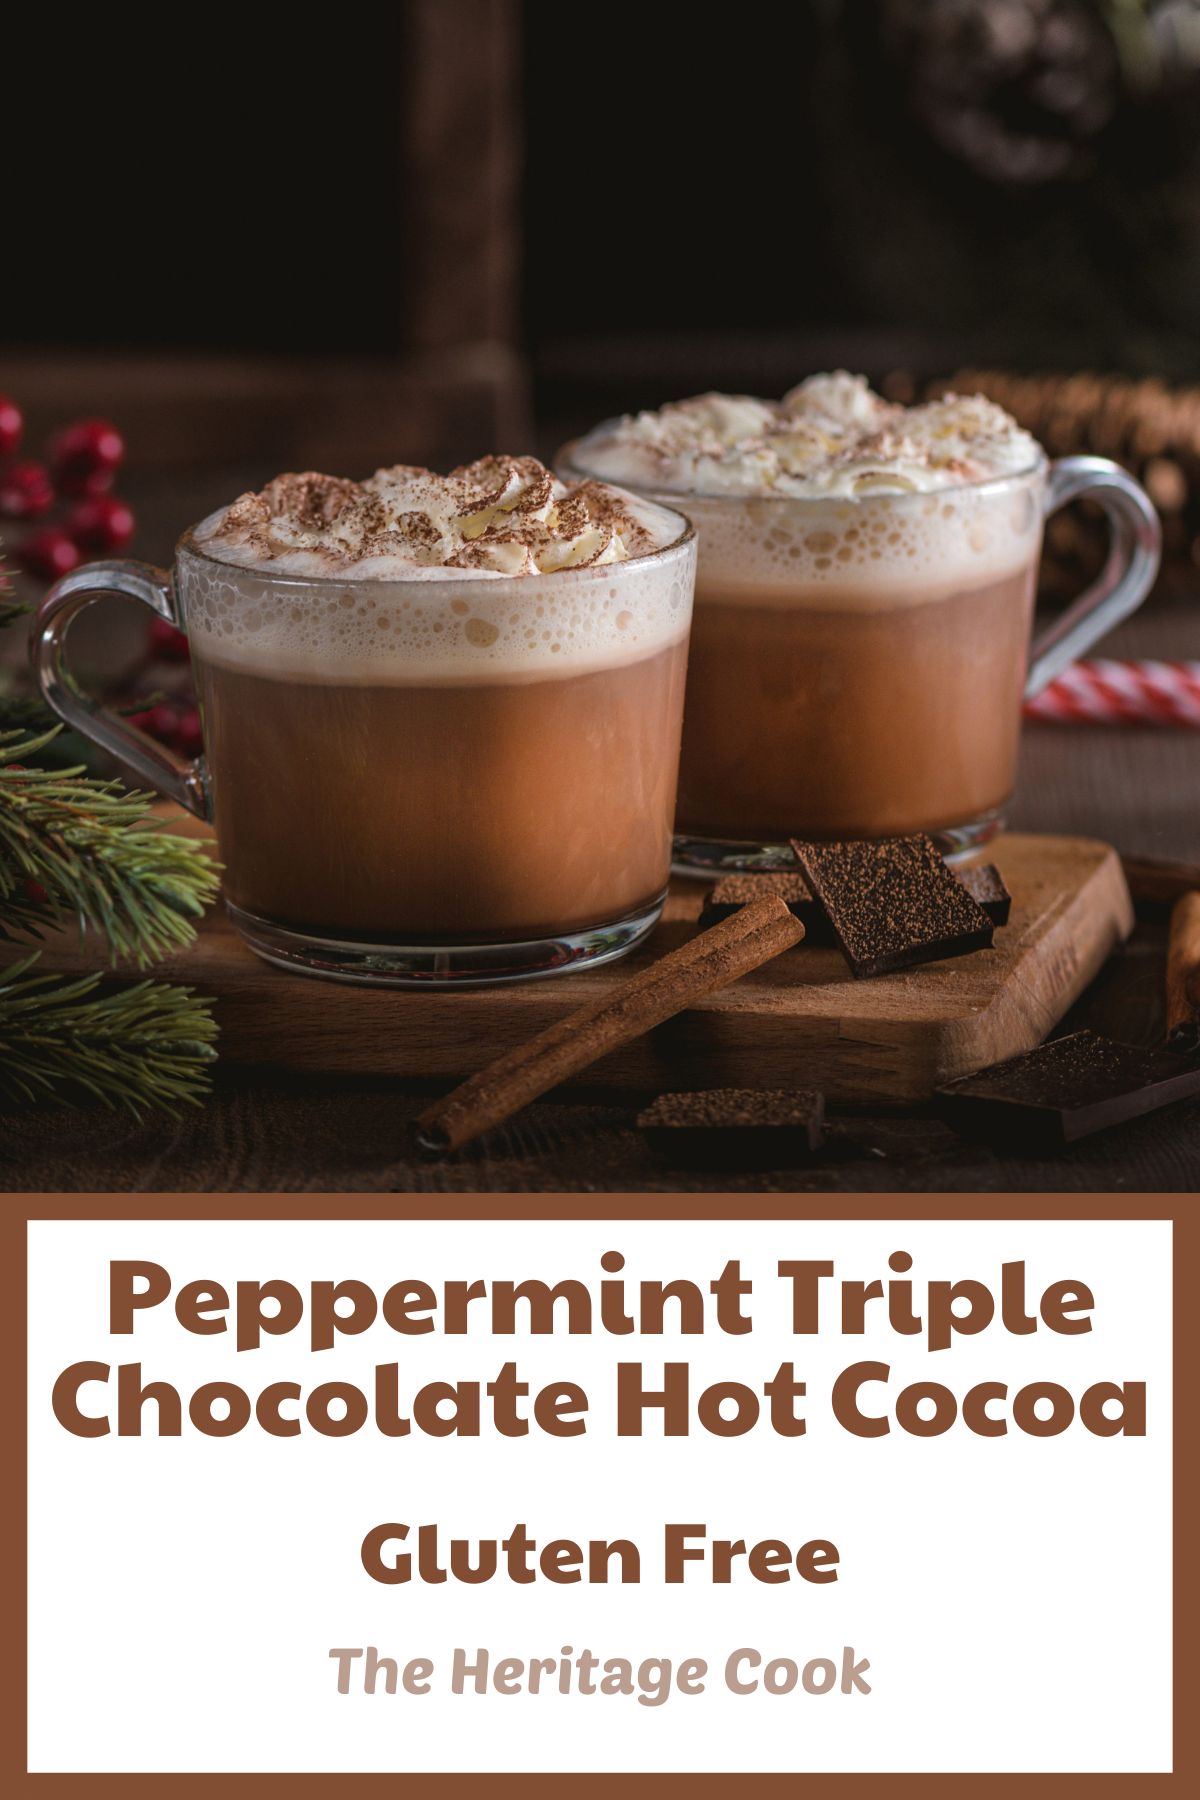 Mugs of hot cocoa with whipped cream on top; Peppermint Triple Chocolate Hot Cocoa, 2022 Jane Bonacci, The Heritage Cook.